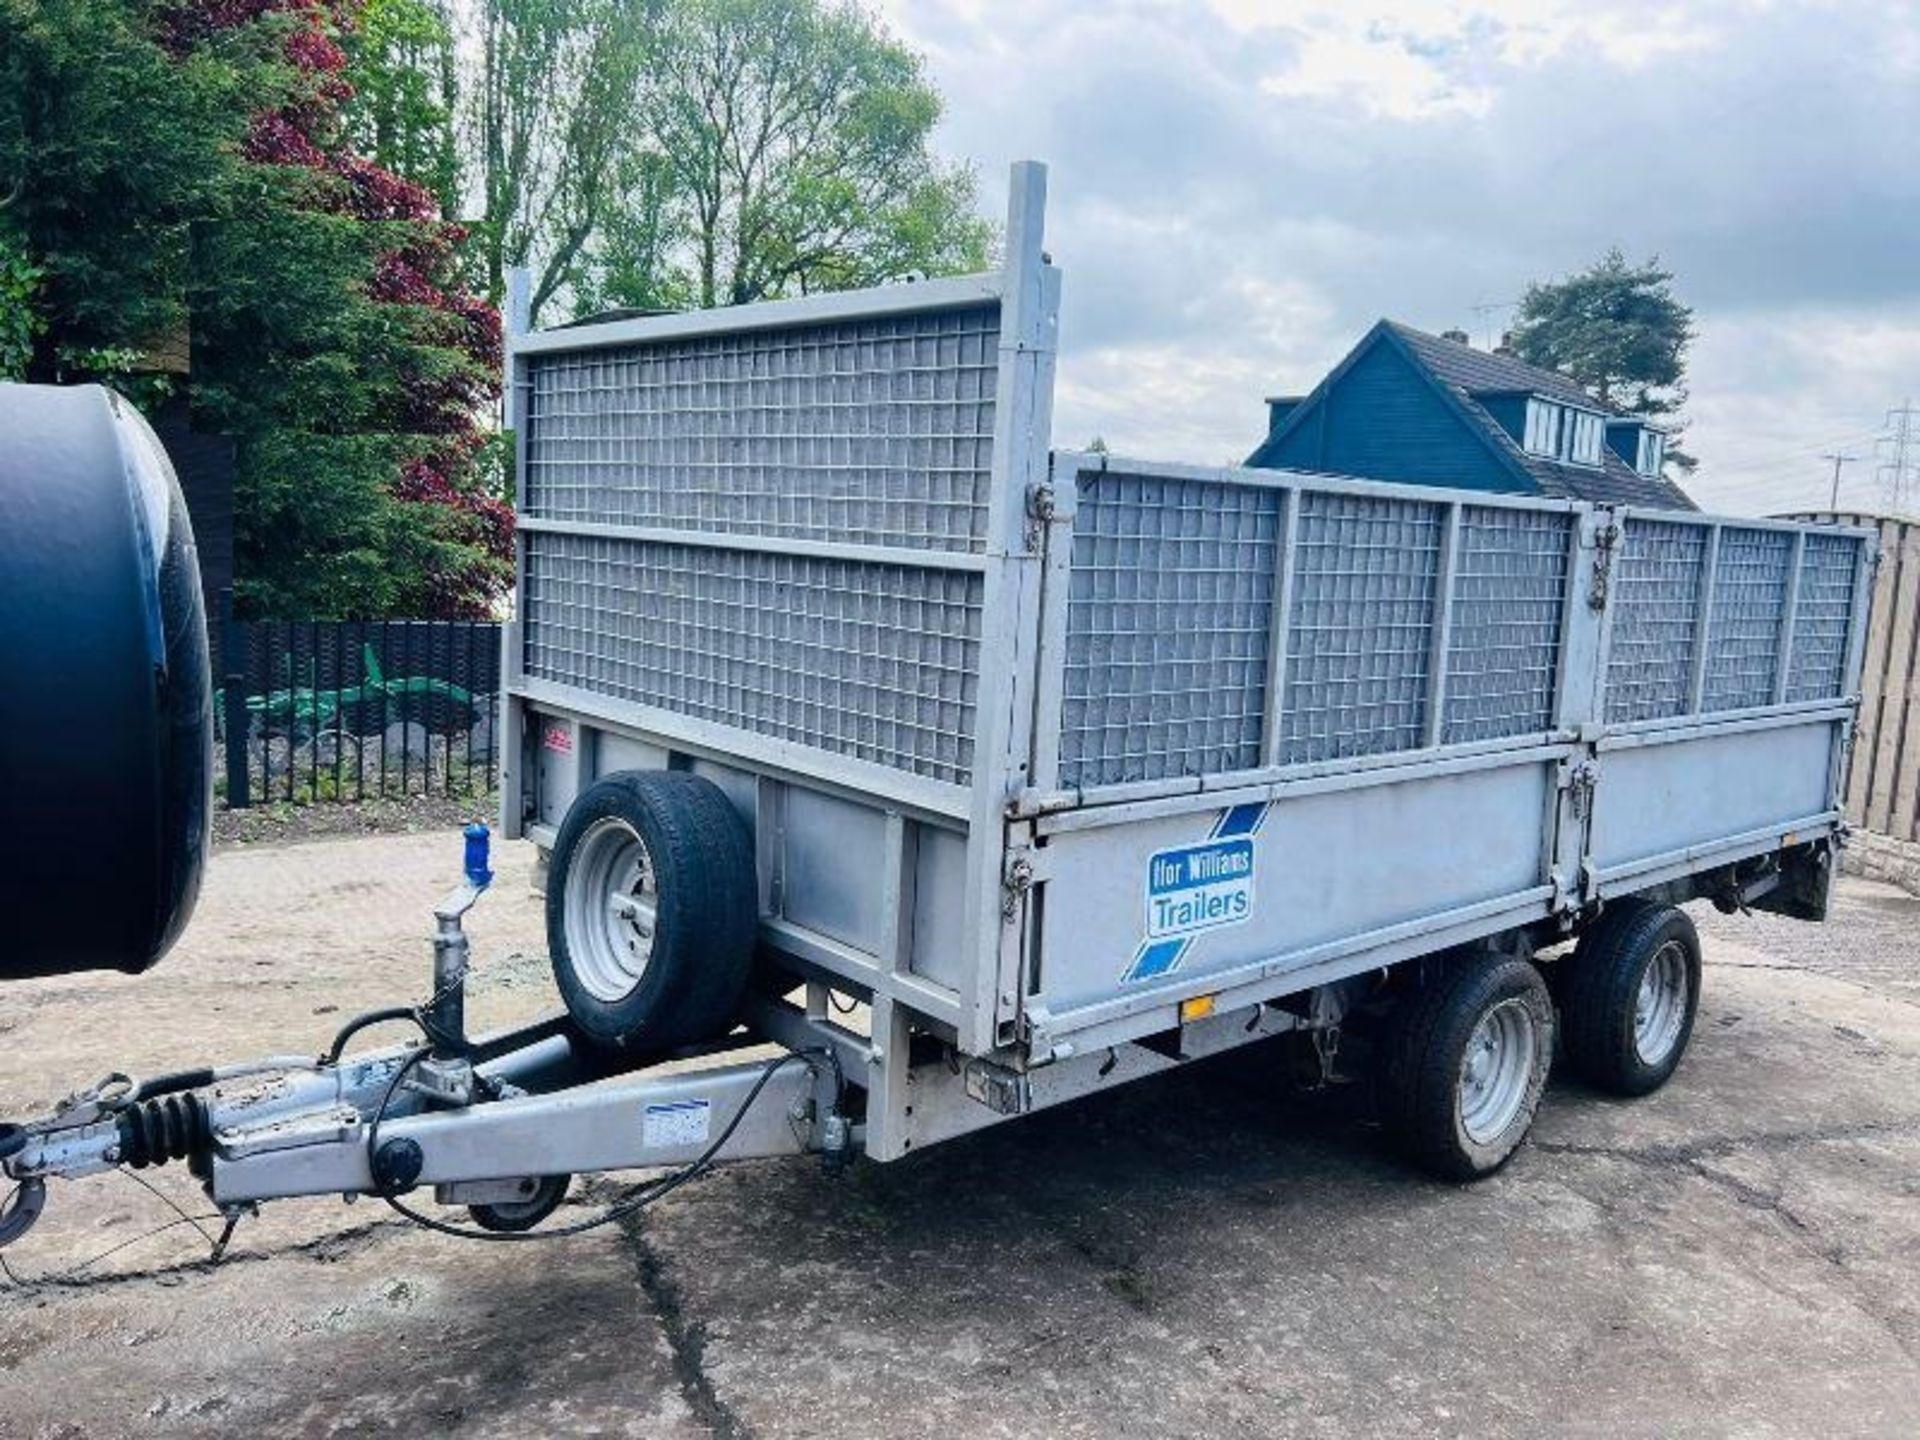 IFOR WILLIAMS LM125G DOUBLE AXLE DROP SIDE TRAILER C/W HIGH SIDED CAGE SIDES